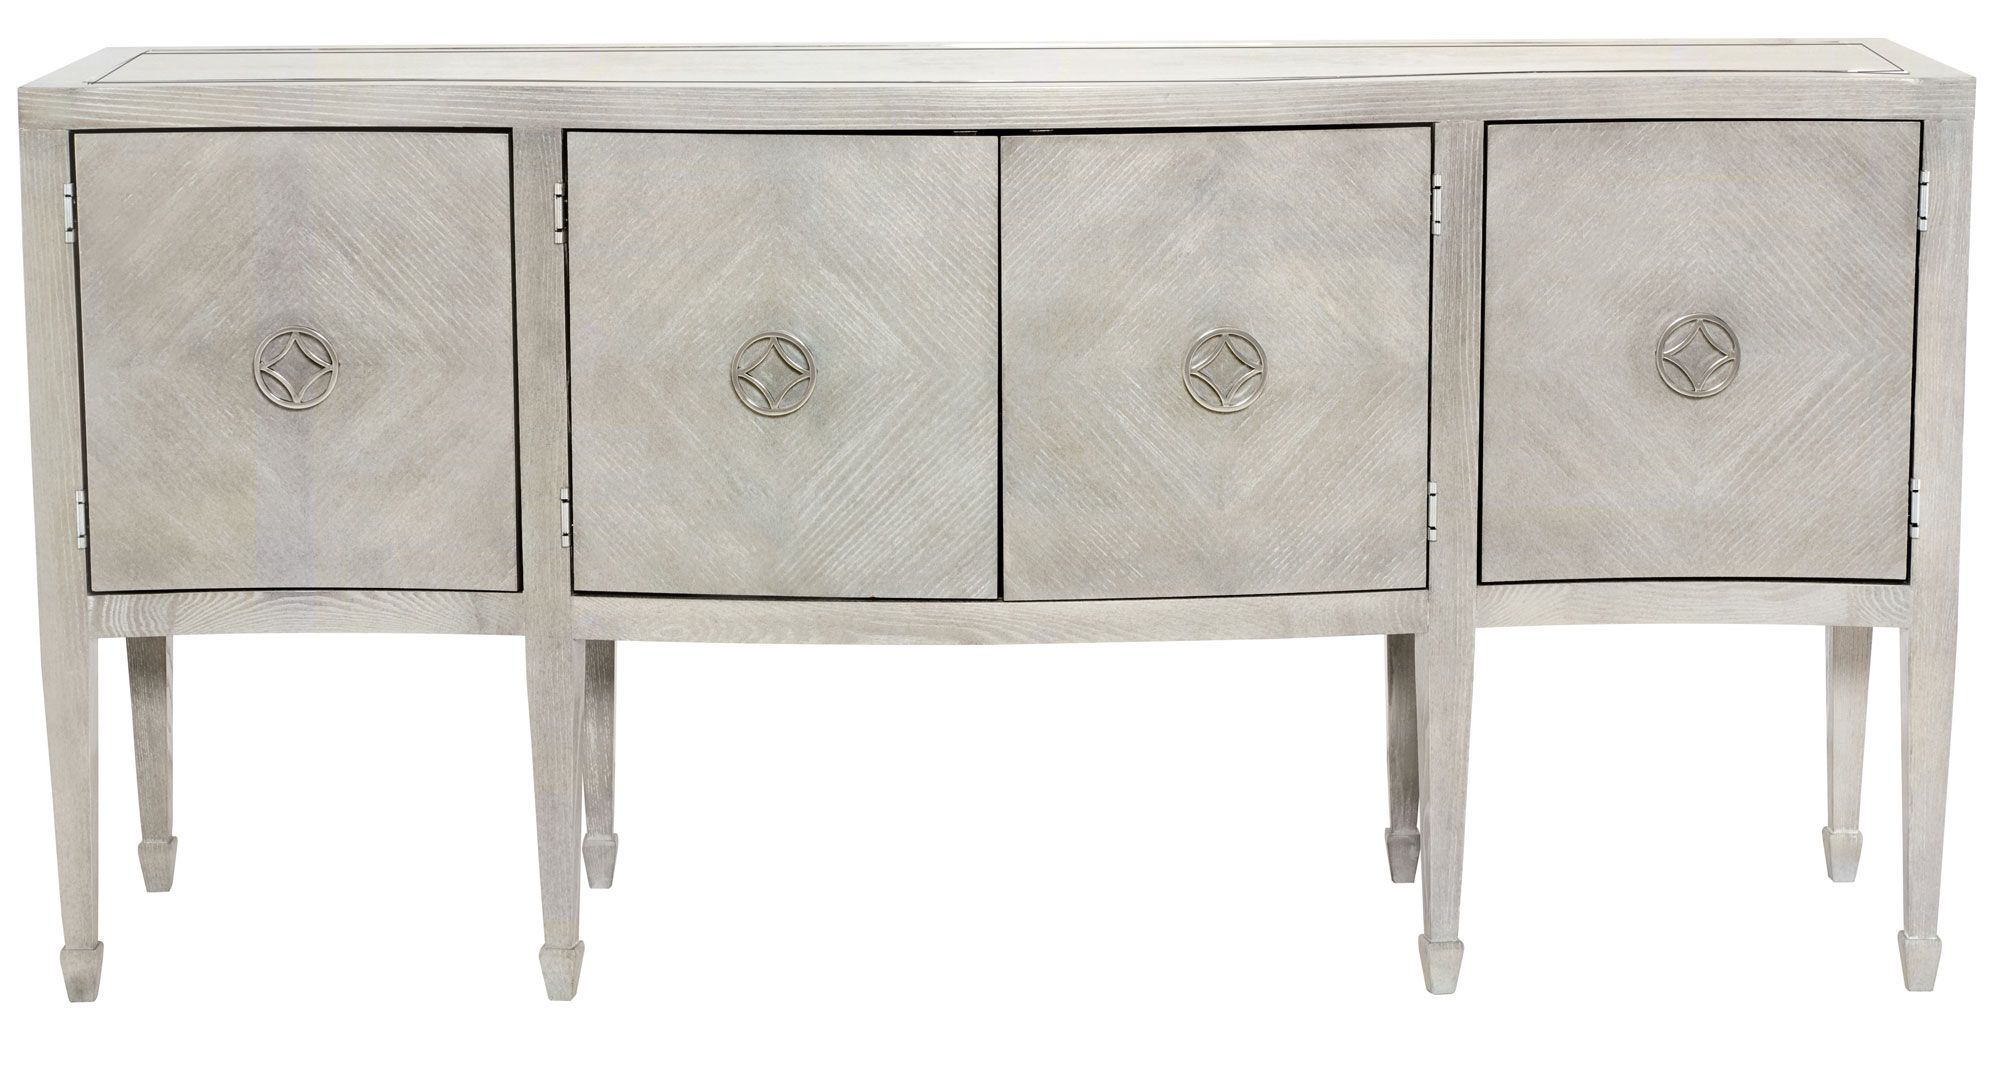 Cabinets, Consoles & Sofa Tables | Htgt Furniture Within Gunmetal Perforated Brass Media Console Tables (View 11 of 20)